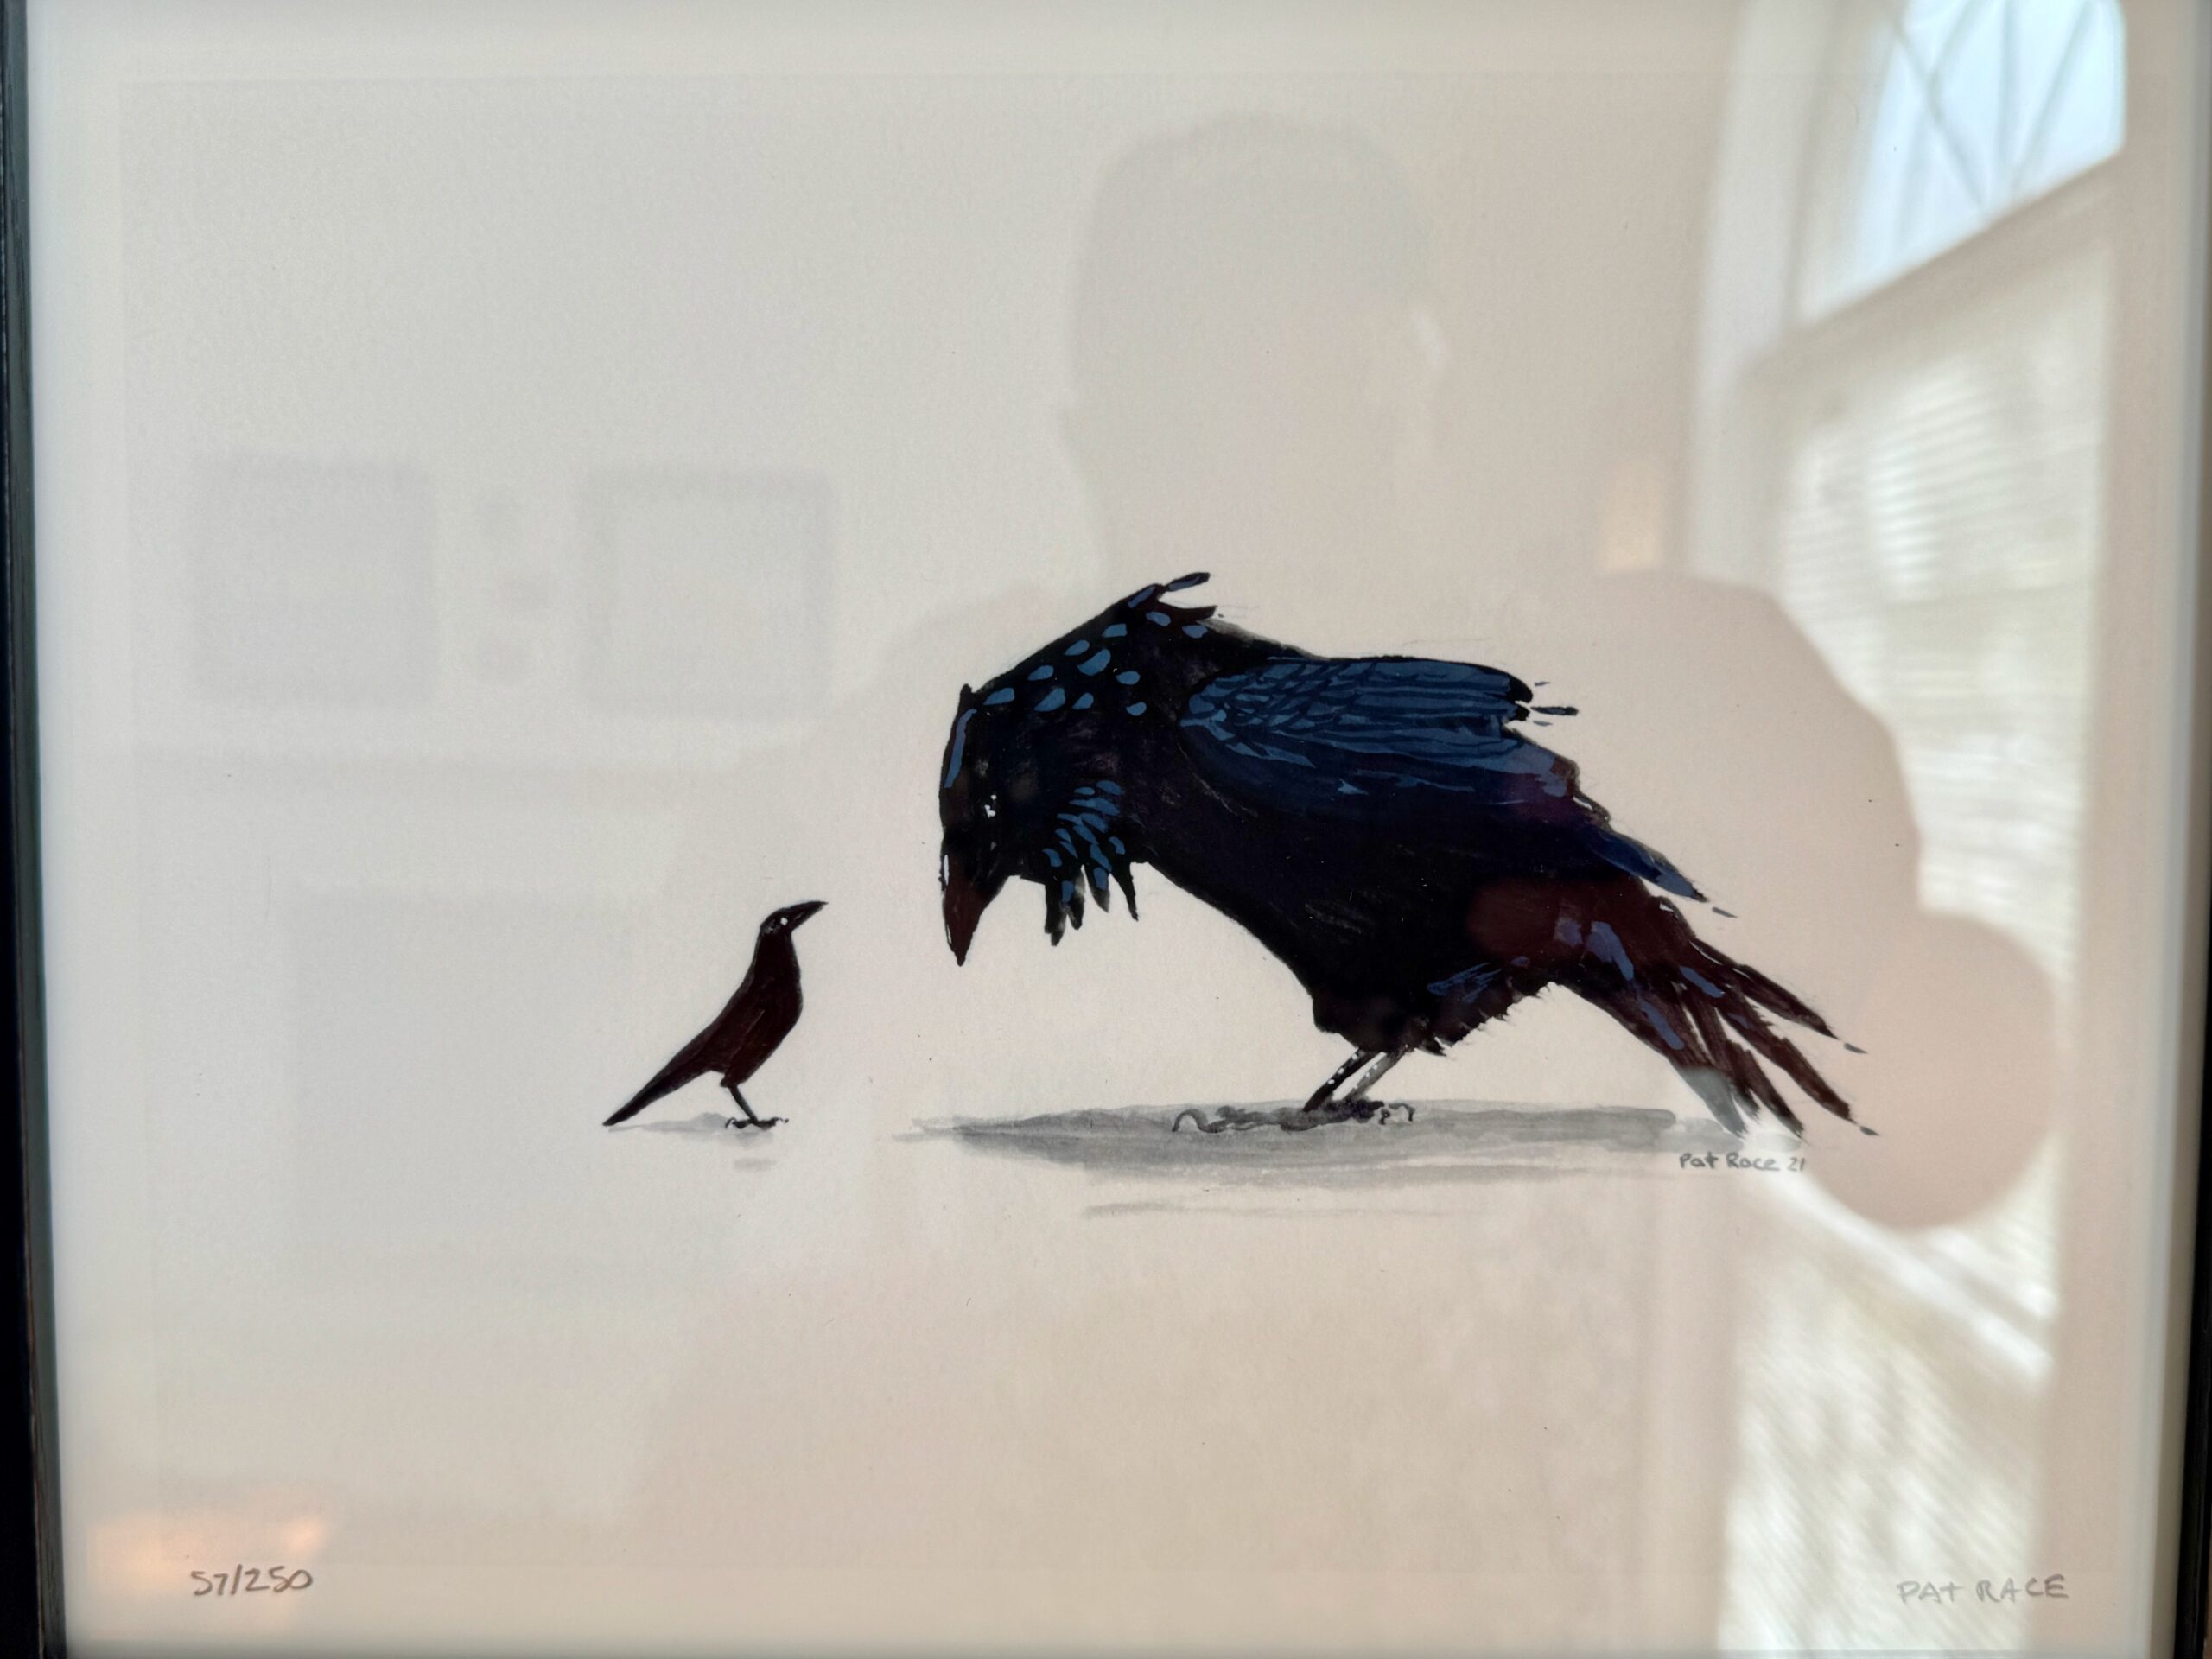 Painting of a large raven 'talking' to a smaller bird